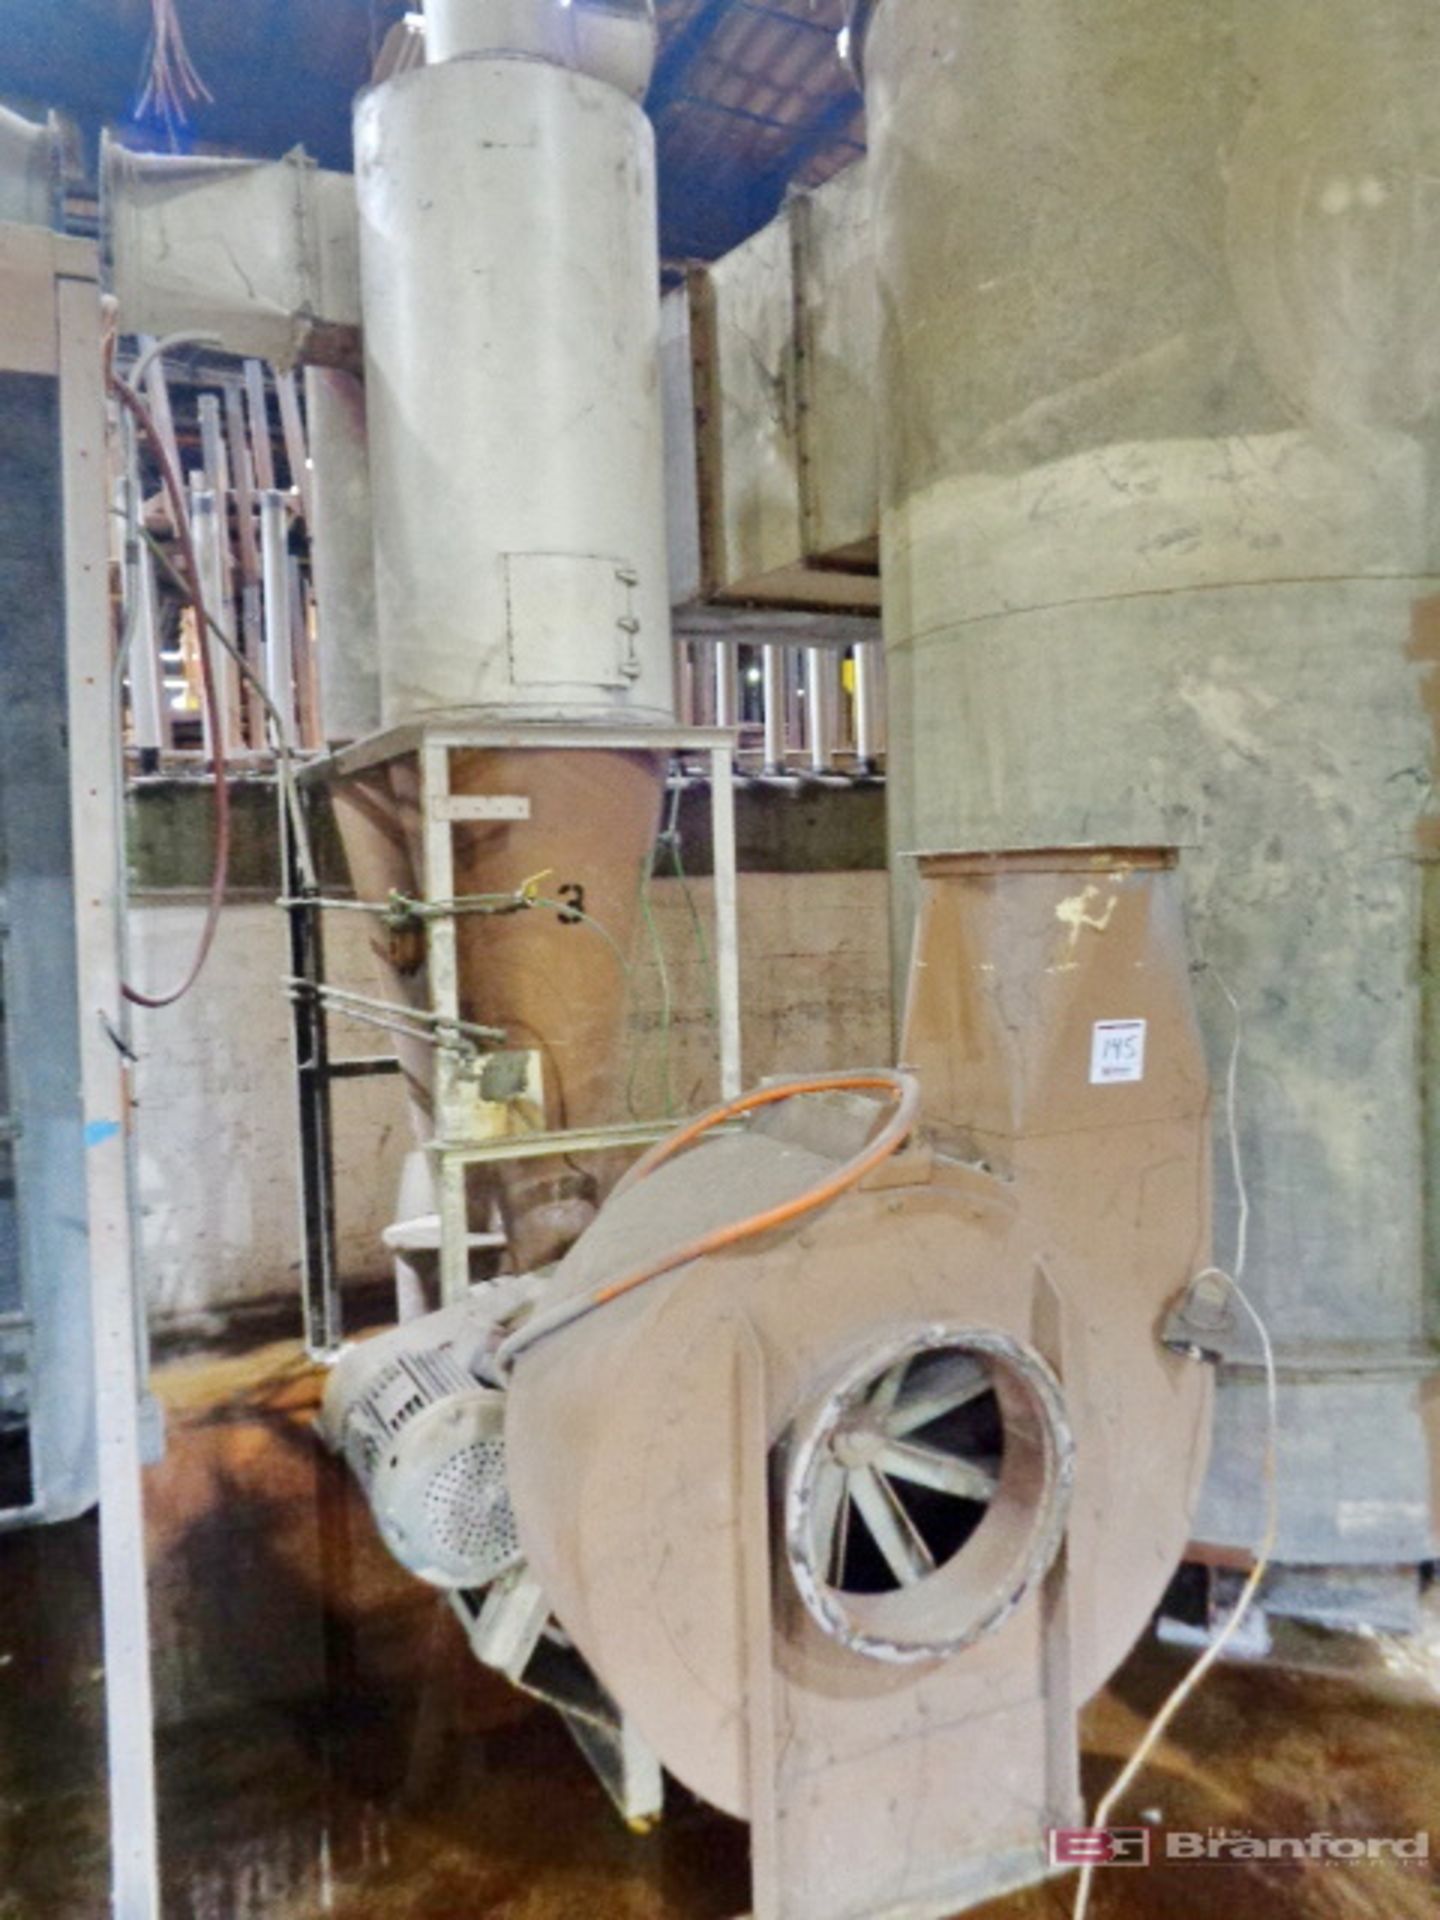 Binks Spray Booth w/ Cyclone Blower and Bag House Filtration Unit - Image 3 of 4